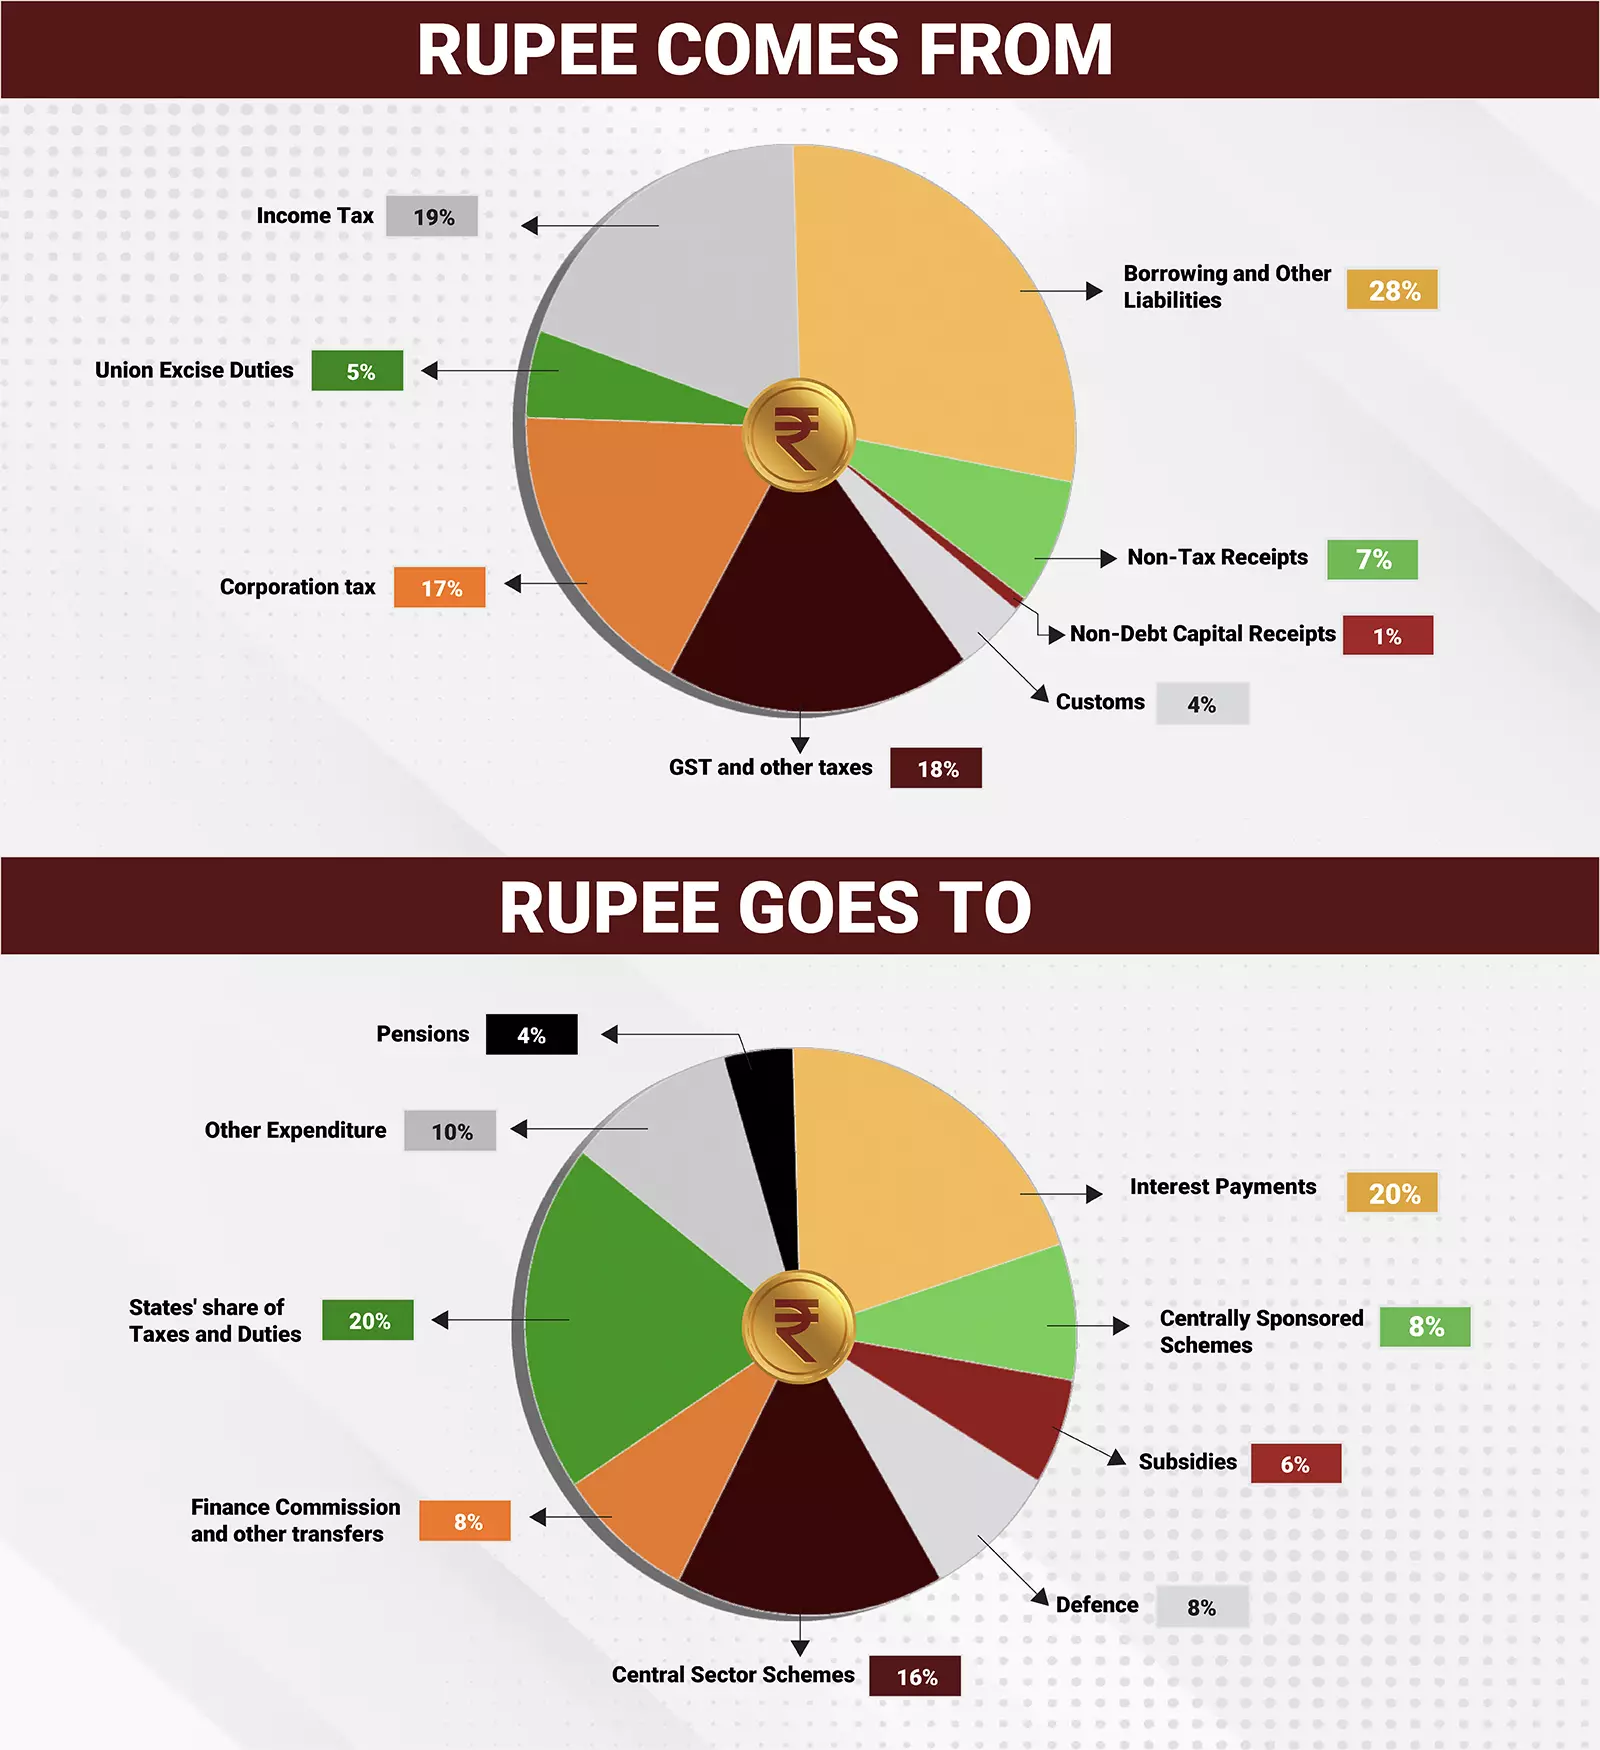 Interim Budget | Where the rupee comes from, where the rupee goes